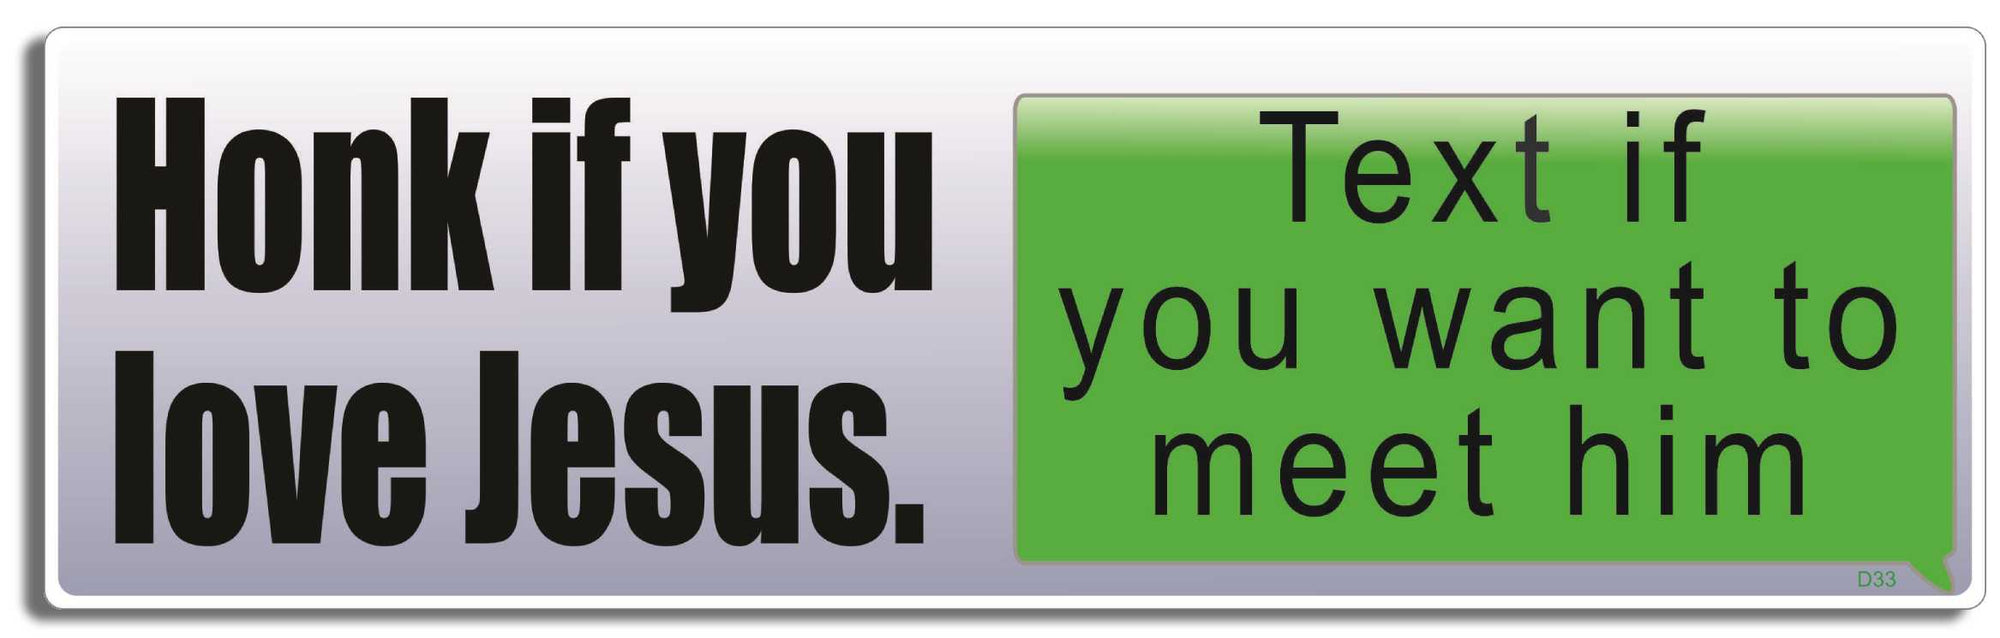 Honk If You Love Jesus. Text If You Want To Meet Him - 3" x 10" Bumper Sticker--Car Magnet- -  Decal Bumper Sticker-funny Bumper Sticker Car Magnet Honk If You Love Jesus. Text If You-  Decal for carschristian, Driving, Funny christian